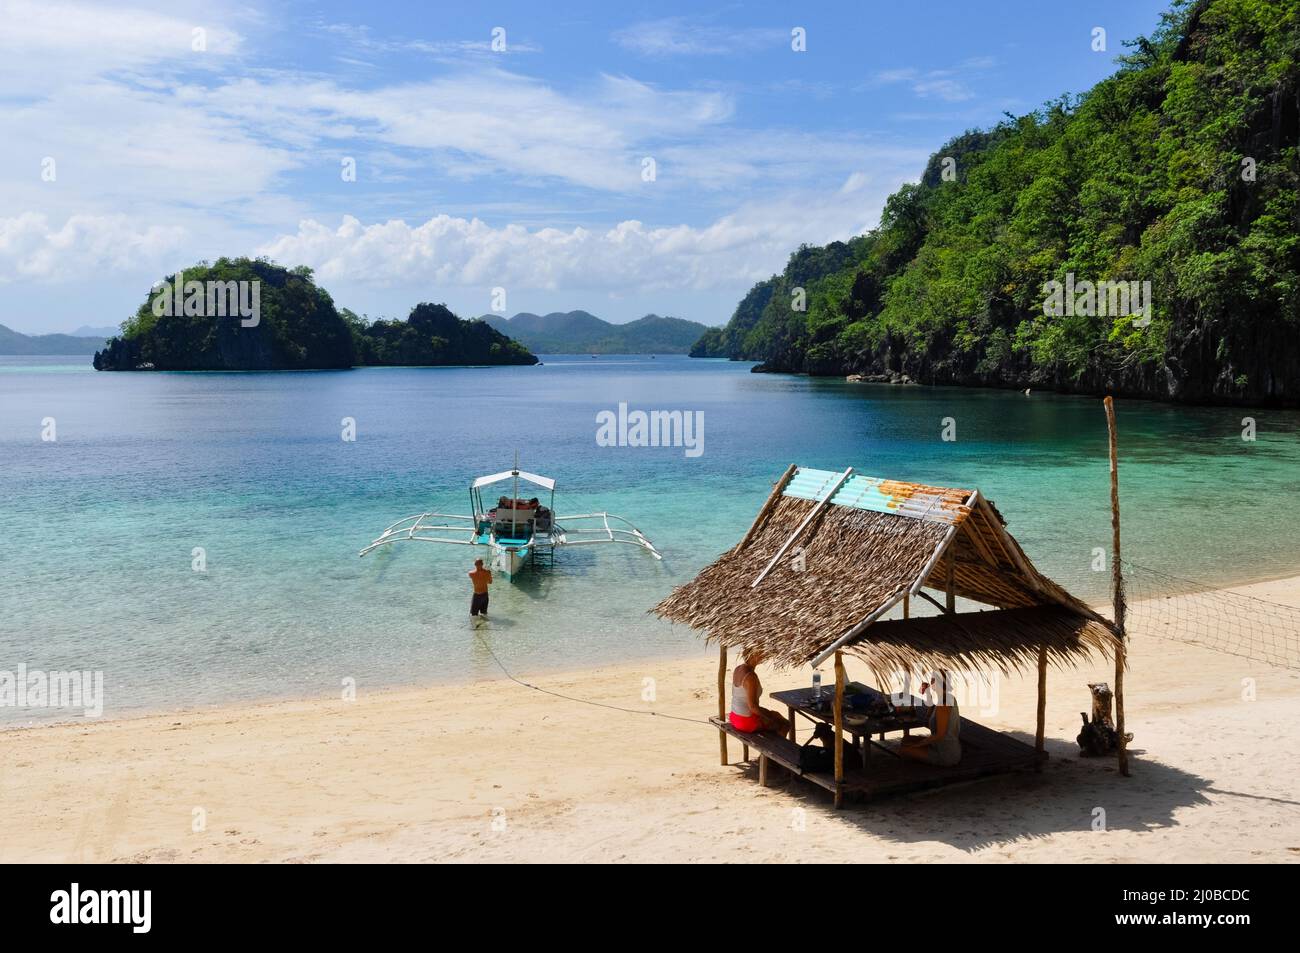 Bald Man pulling wooden traditional filipino boat while two women rest in bamboo hut at white sand beach Stock Photo